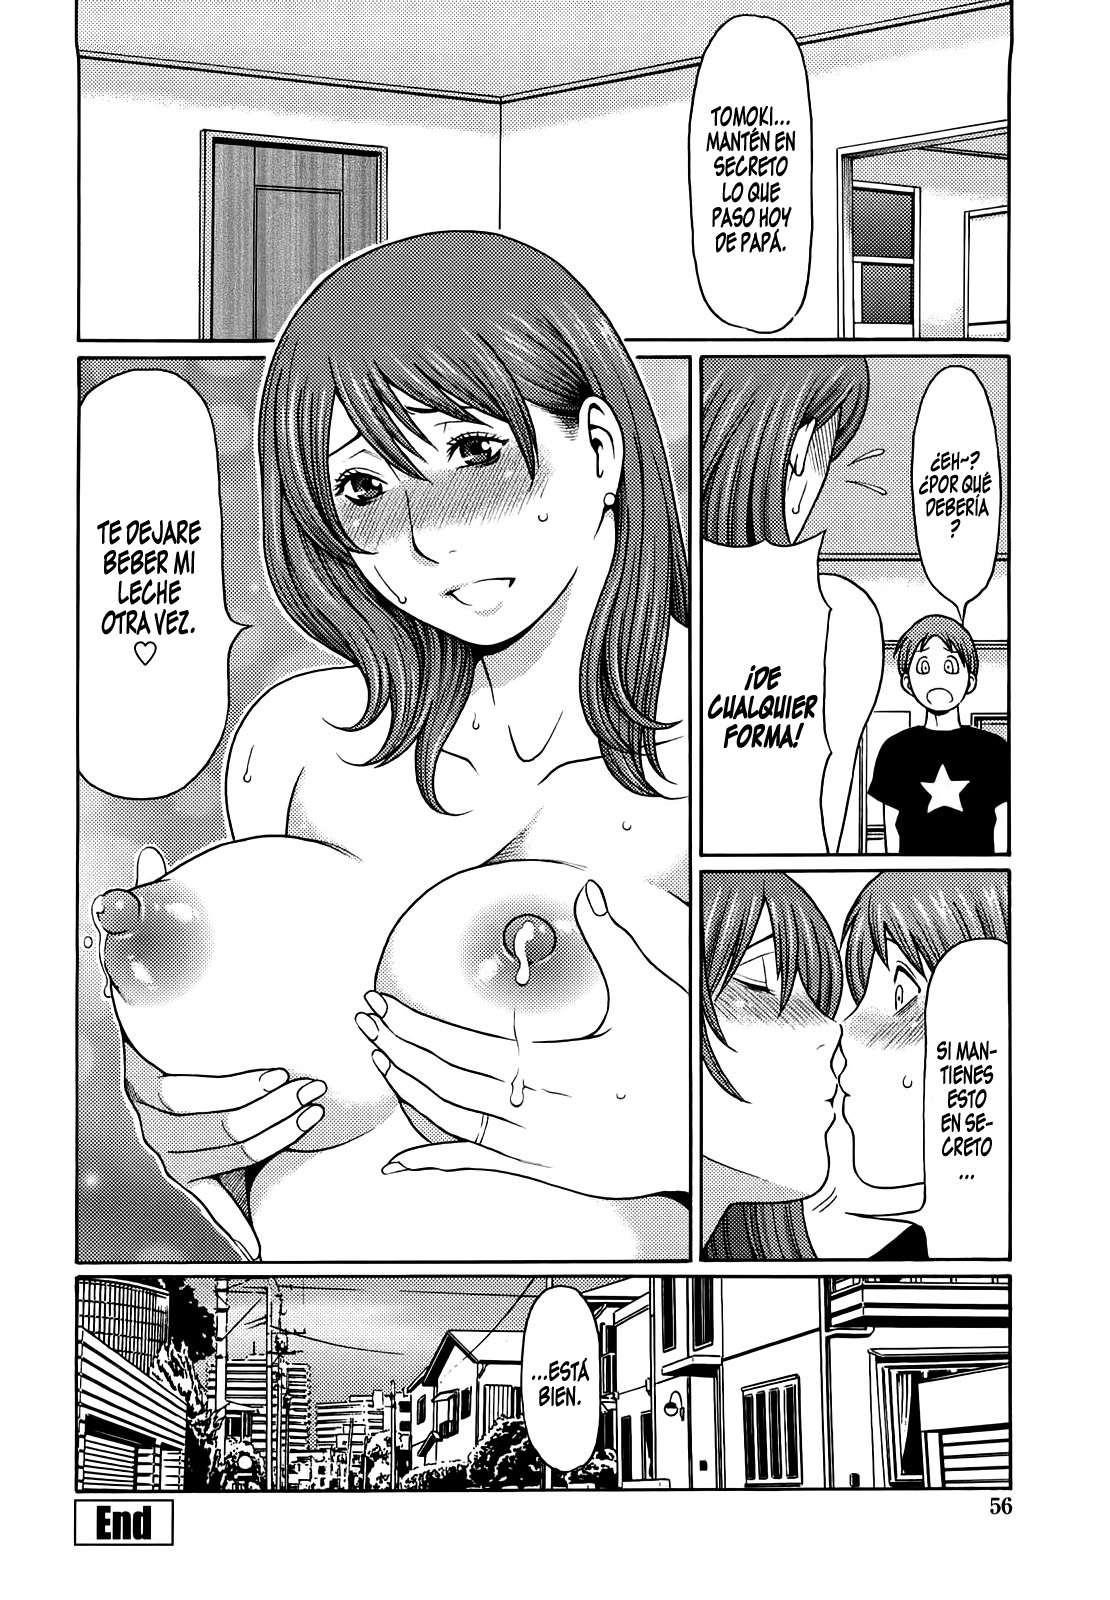 Immorality Love-Hole Completo (Sin Censura) Chapter-3 - 17